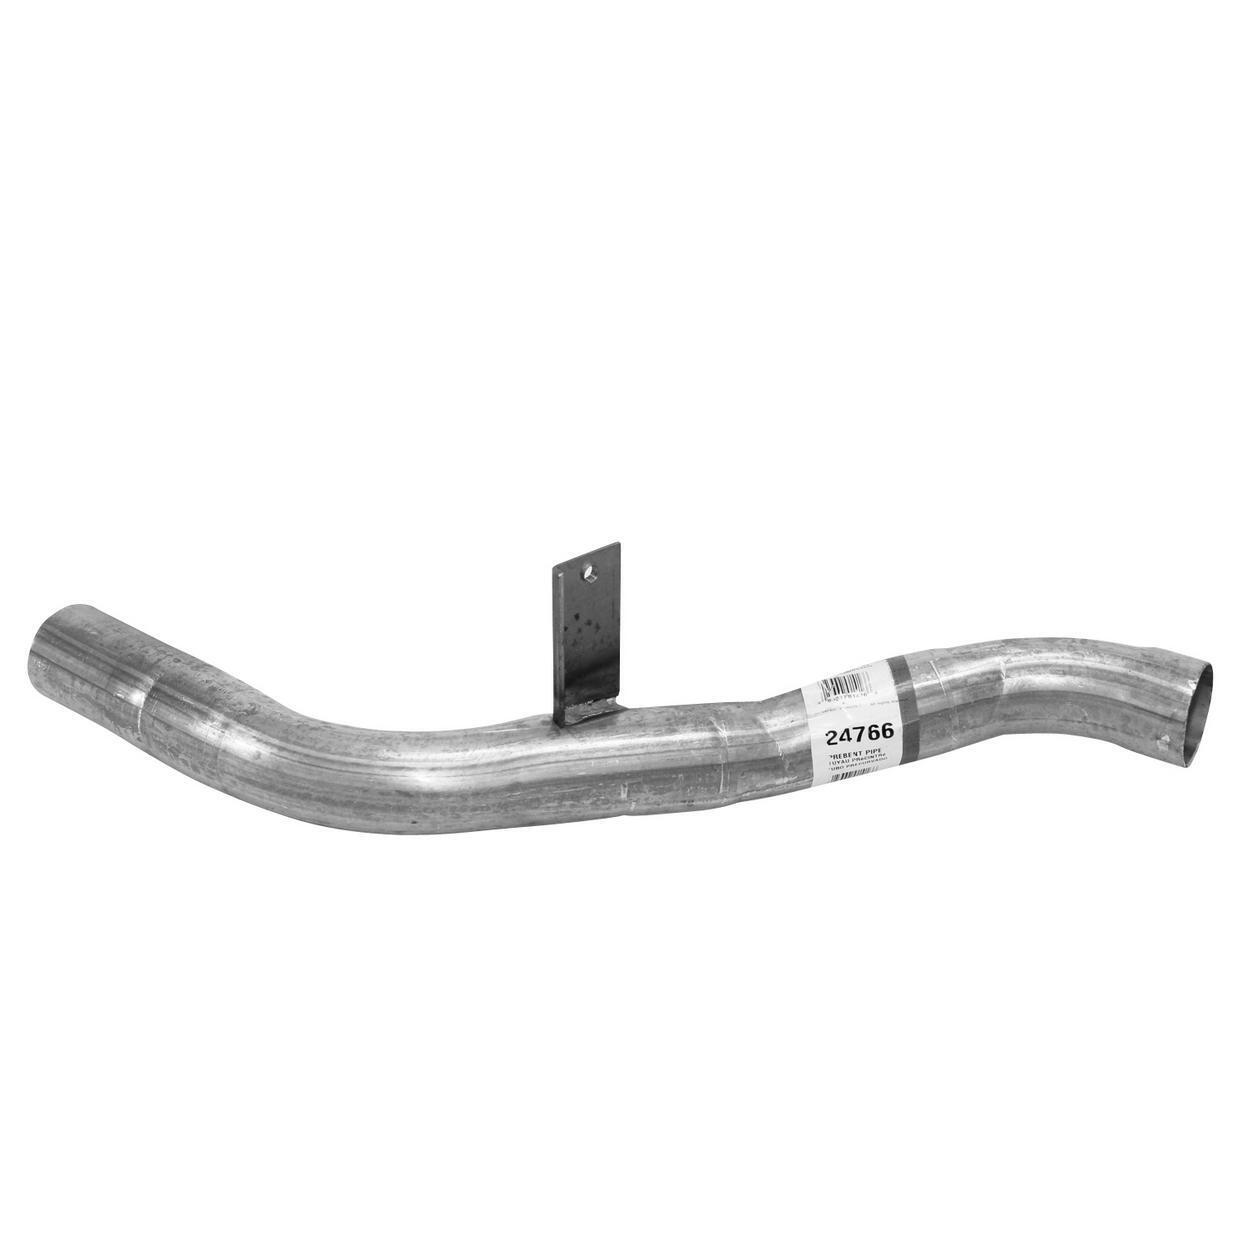 Exhaust Tail Pipe for 1987-1989 Pontiac 6000 2.5L L4 GAS OHV